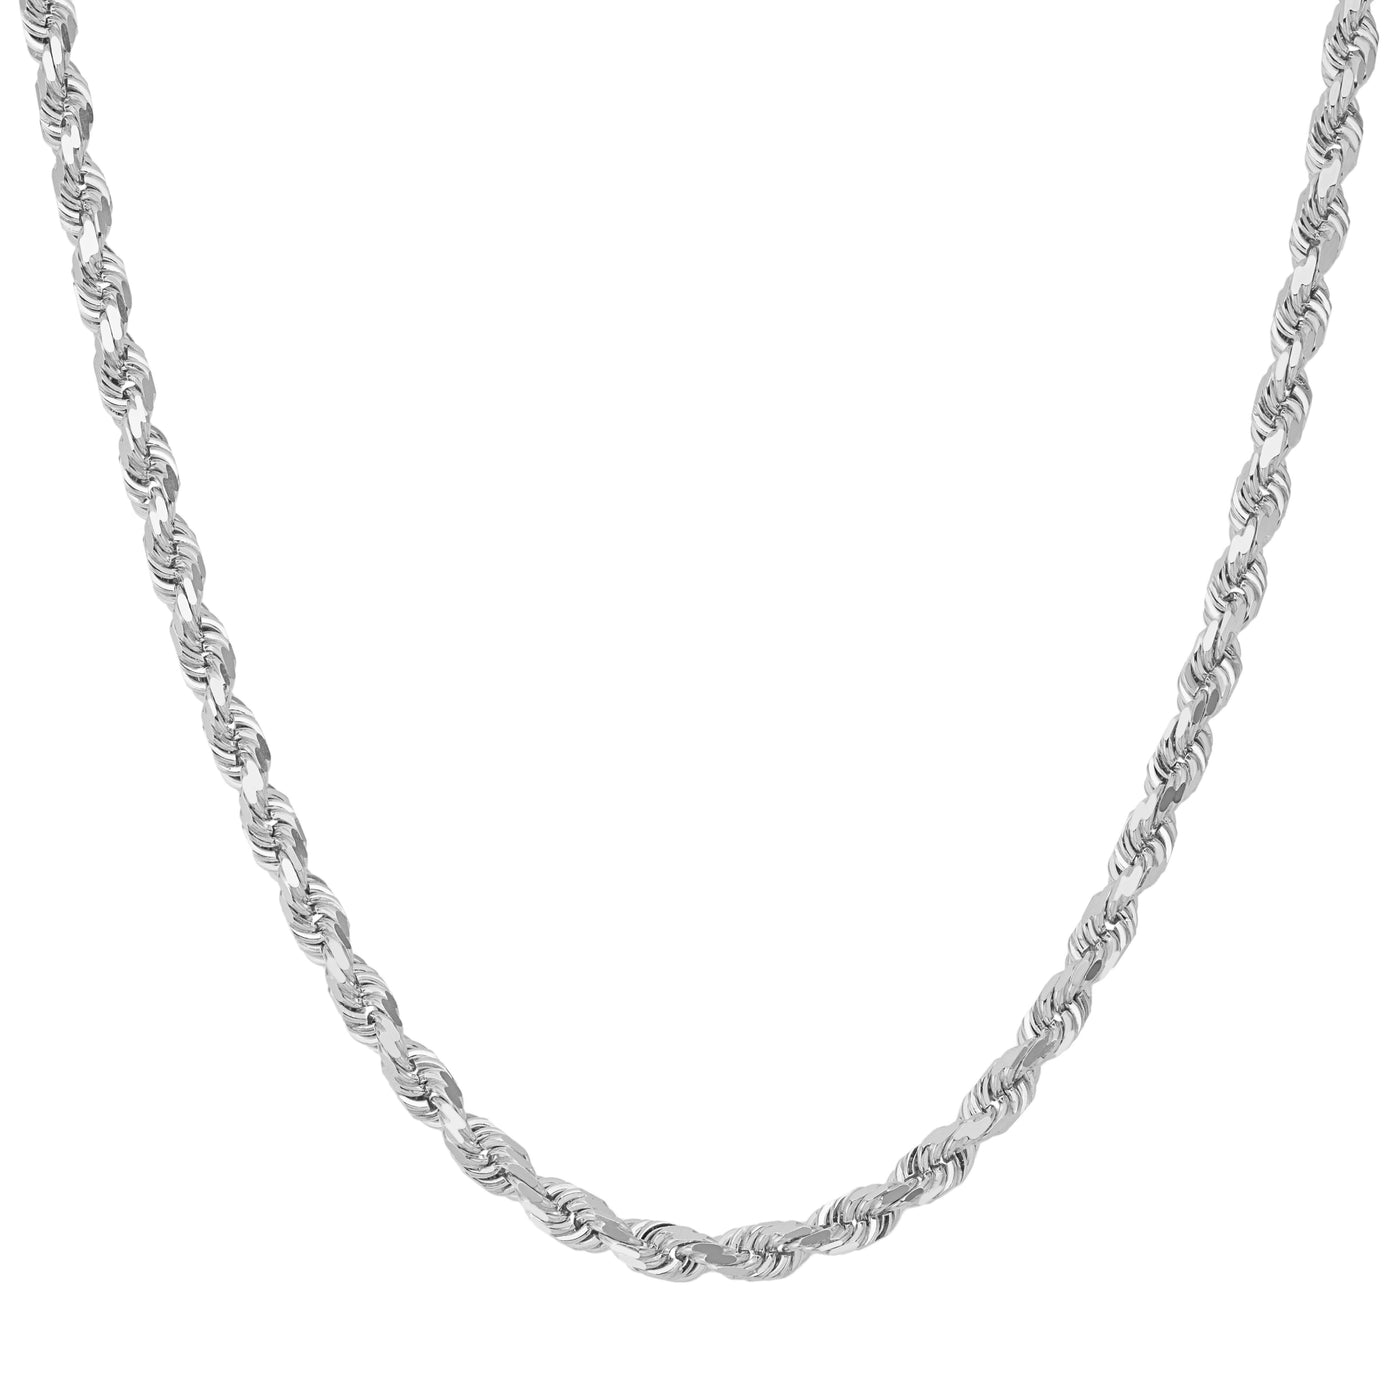 Women's Rope Chain Necklace 10K White Gold - Solid